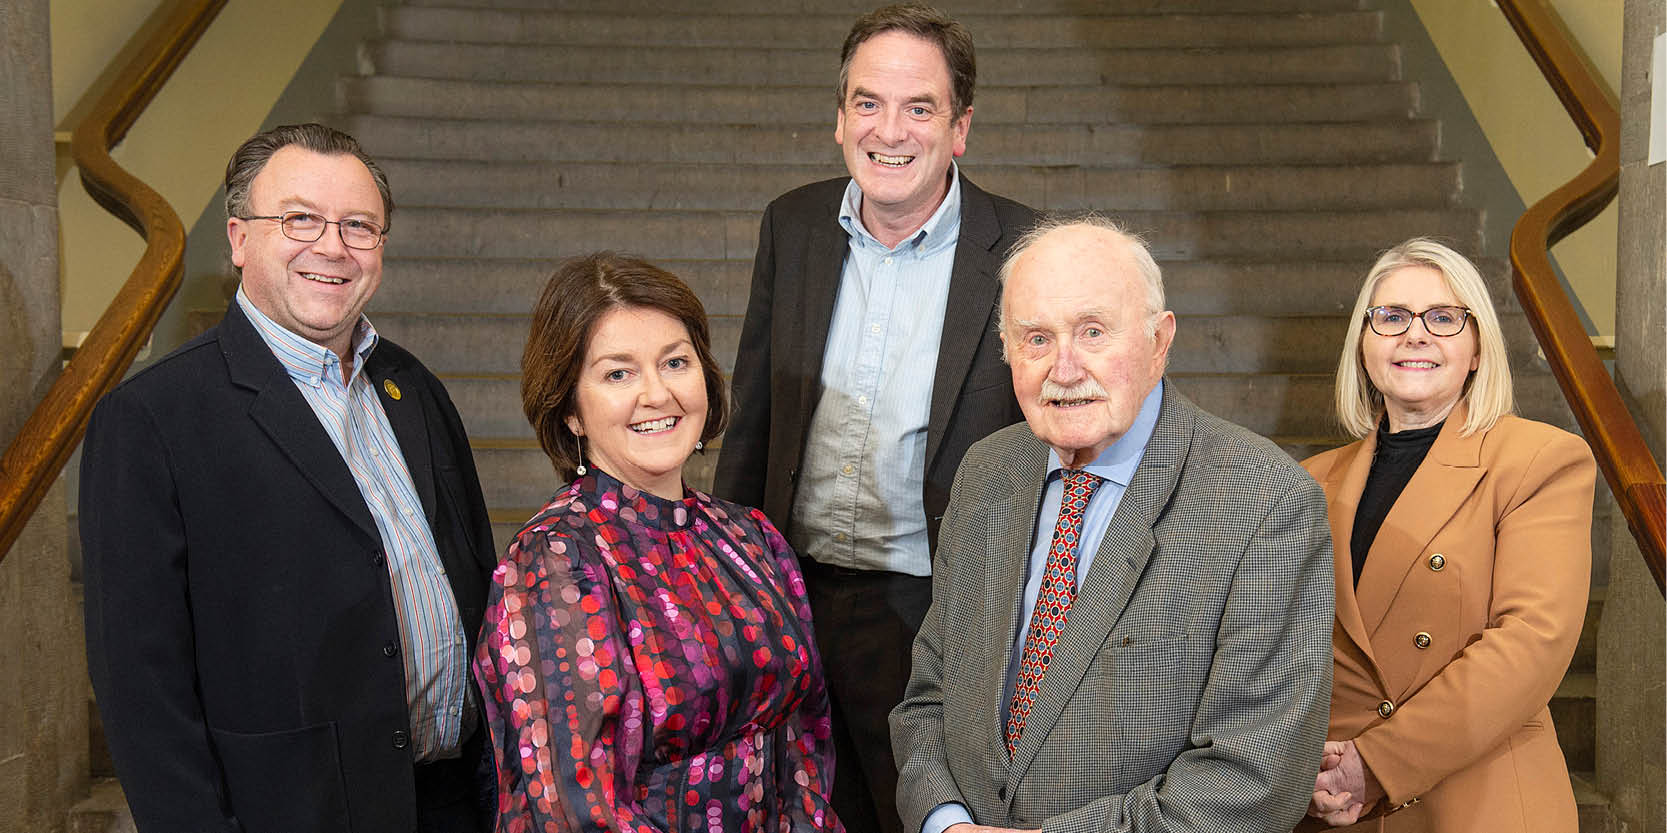 Food scientists gather at UCC for 50th anniversary conference 